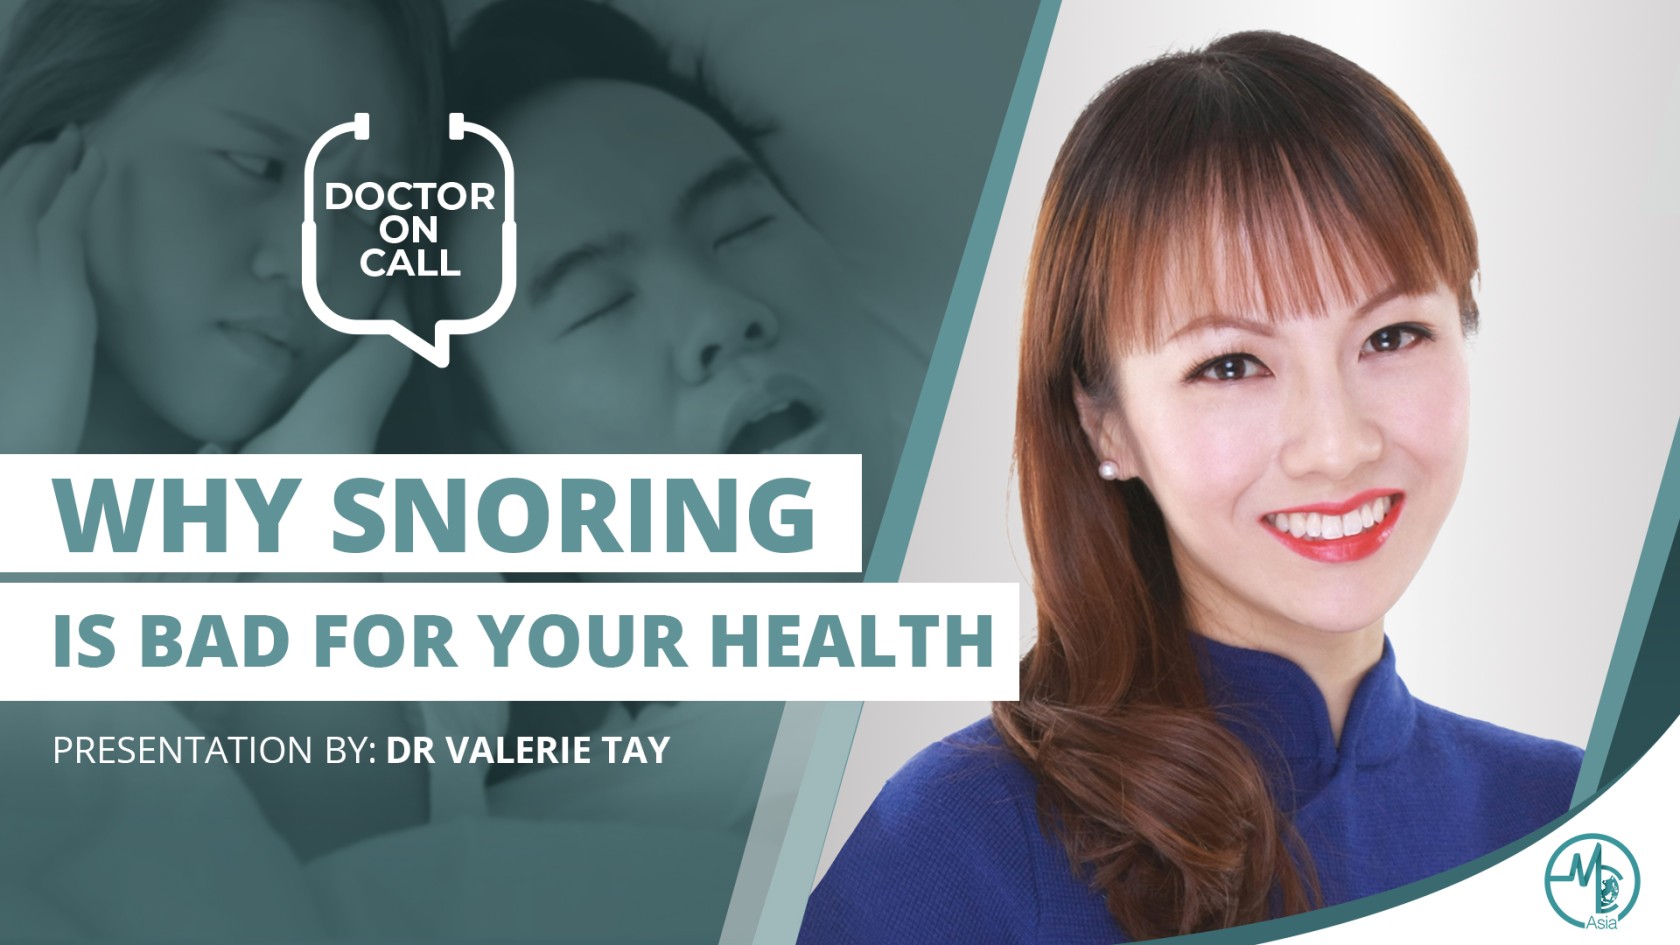 Doctor On Call (DOC): Dr Valerie Tay – Why Snoring Is Bad For Your Health (Part 1)